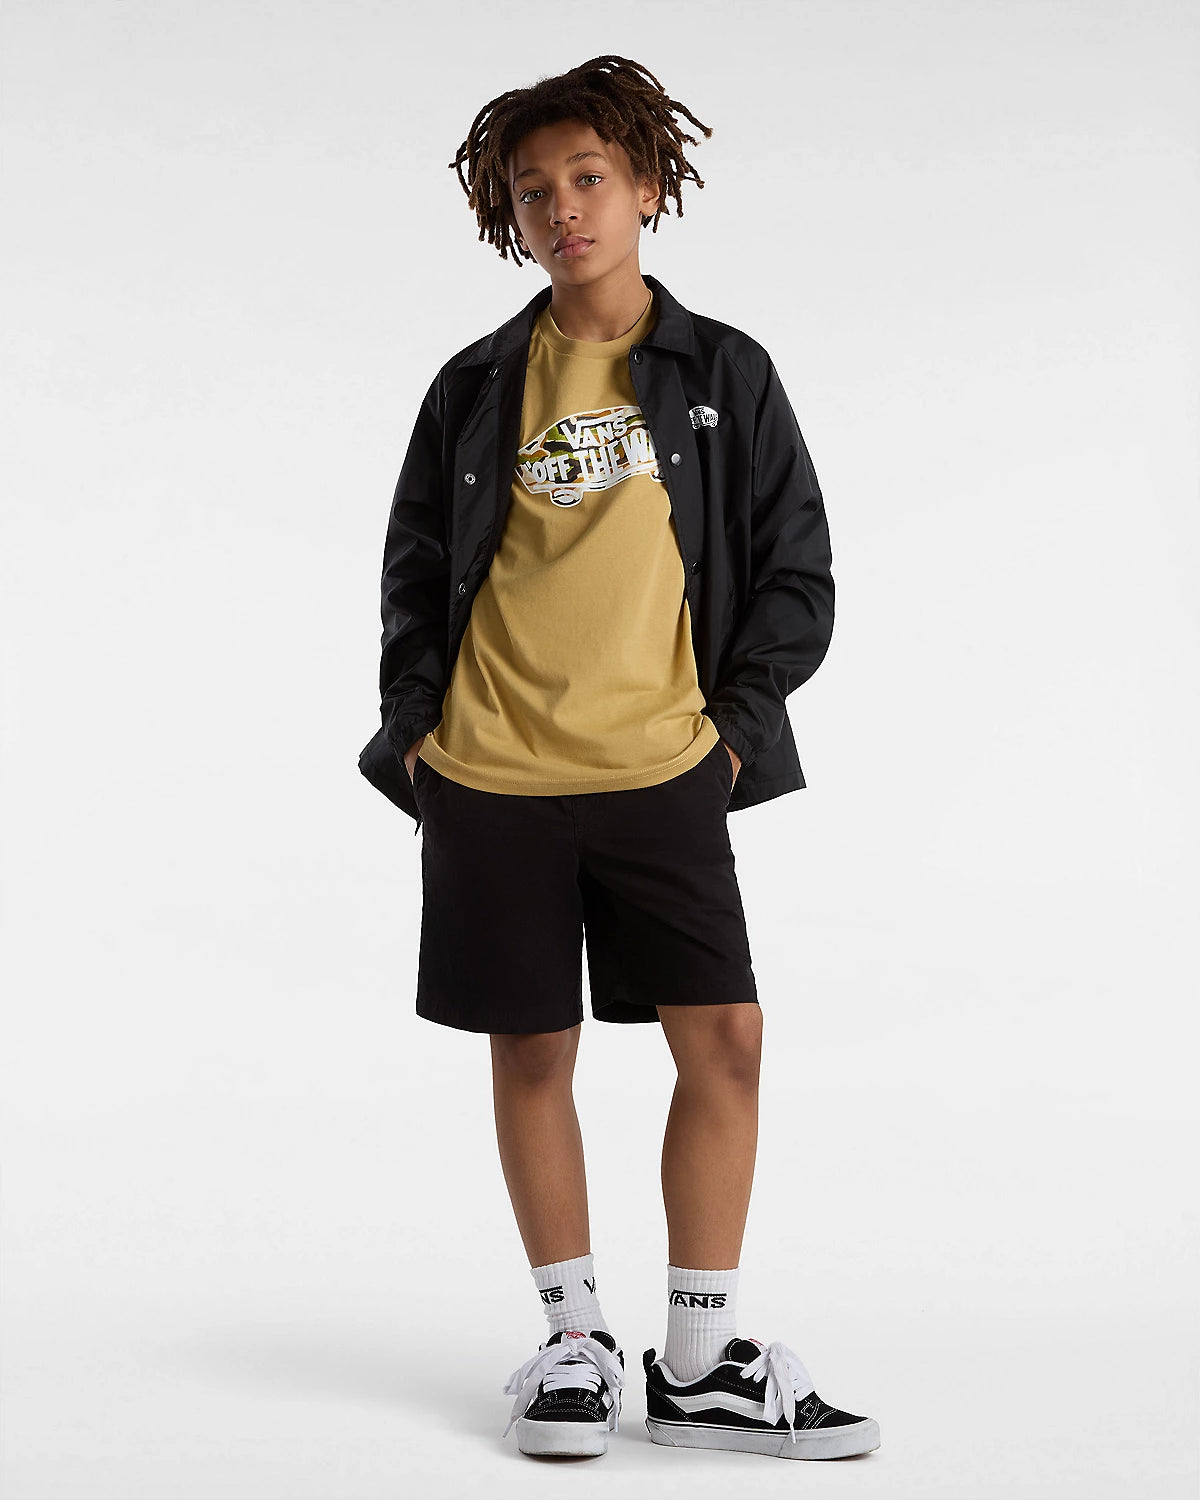 VANS - STYLE76 SS YOUTH TEE - ANTELOPE